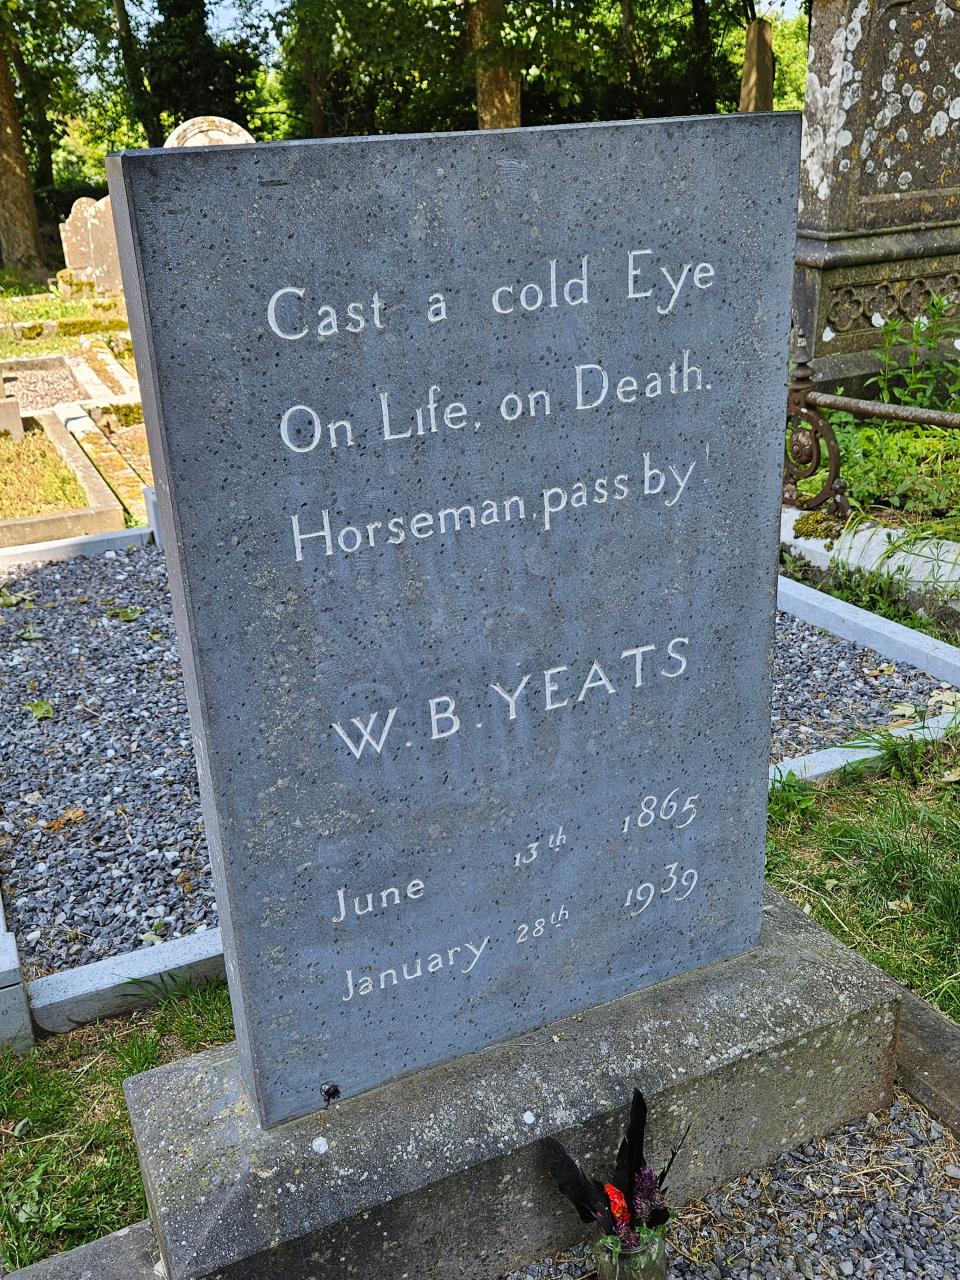 Linda and Joe Kinnan's vacation tour in England, Scotland and Ireland included a stop in Sligo and the gravesite of Irish poet William Butler Yeats.